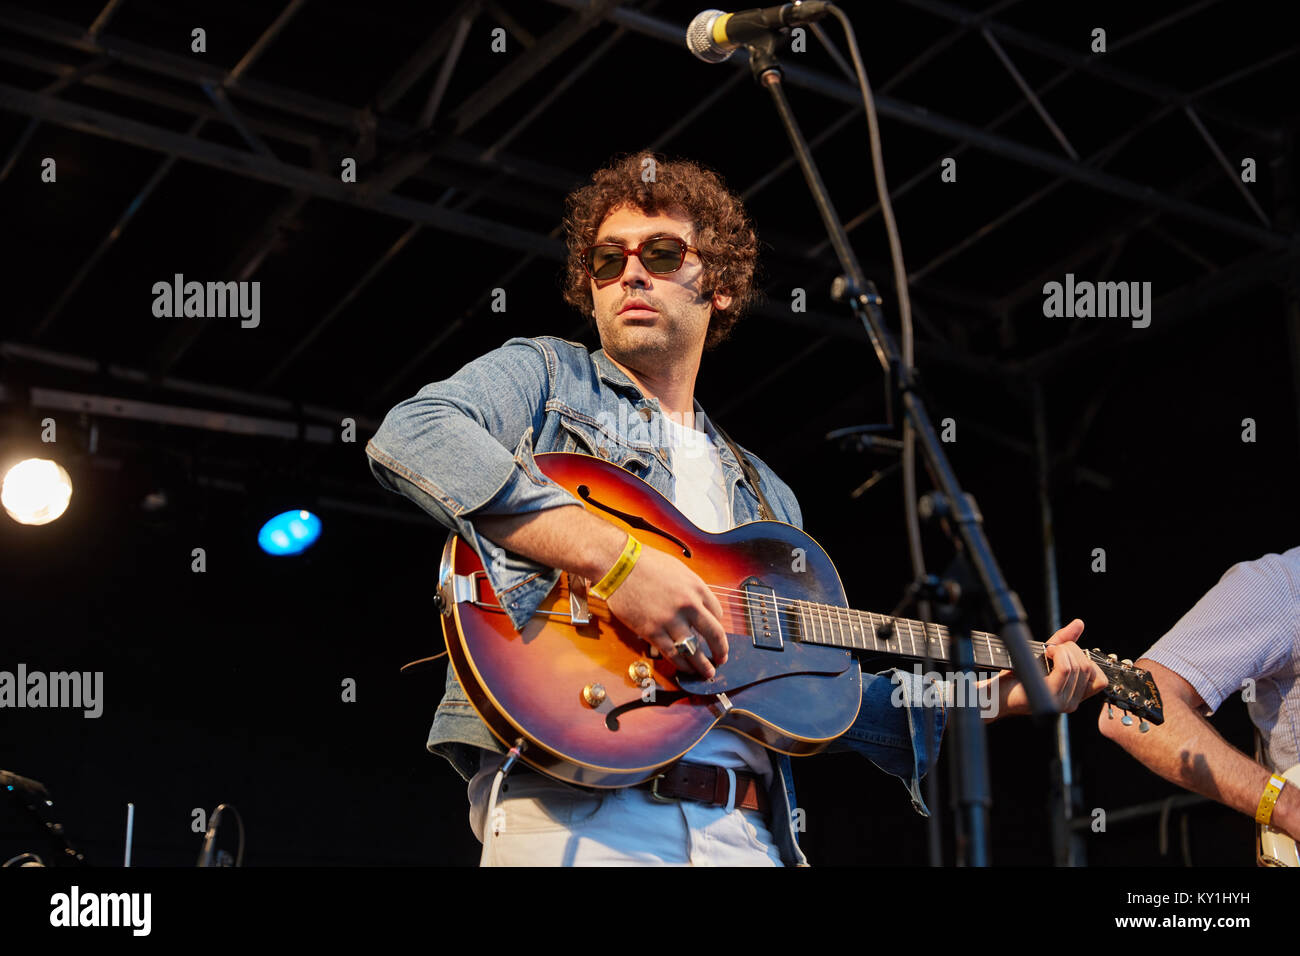 The American rock band Allah-Las performs a live concert at the Norwegian  music festival Piknik i Parken 2016 in Oslo. Here the band's lead singer  and guitarist Miles Michaud is seen live